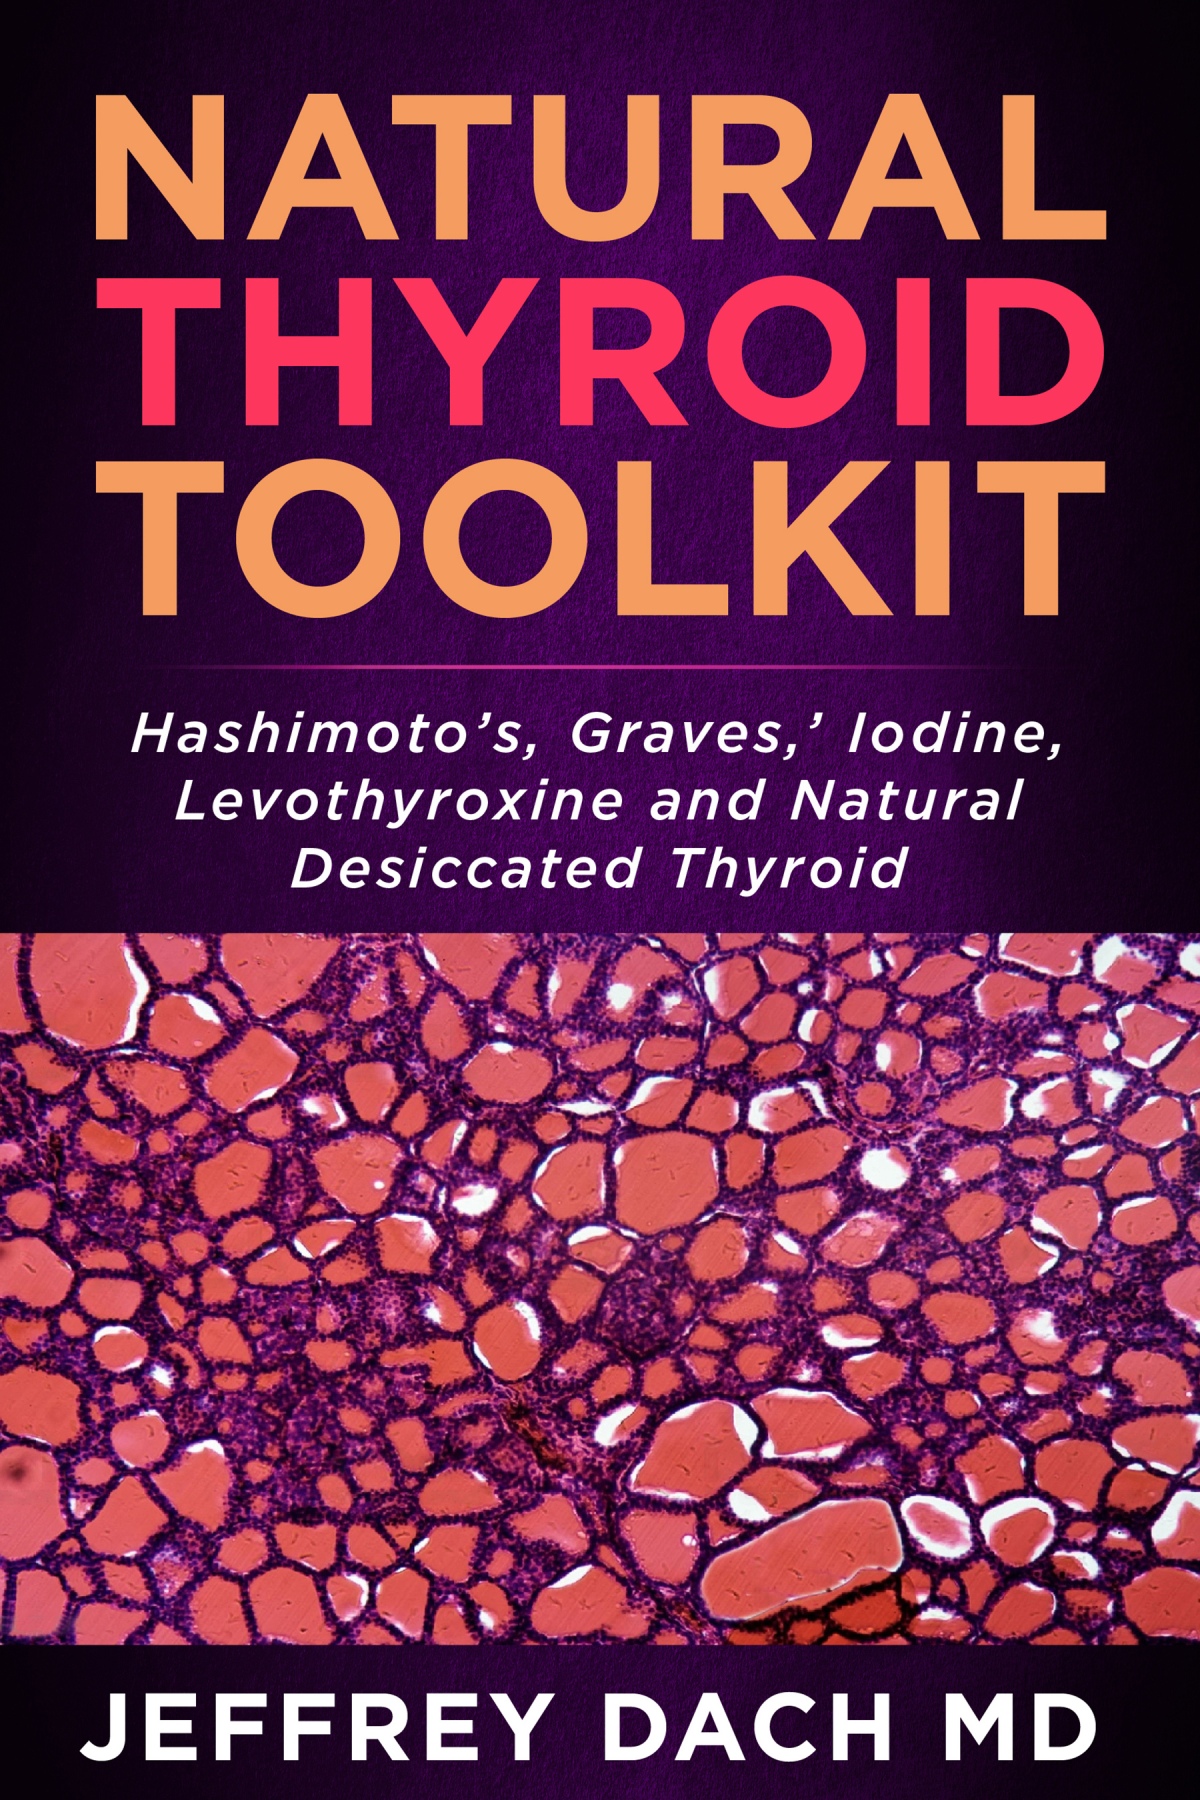 Natural Thyroid Toolkit by Jeffrey Dach MD